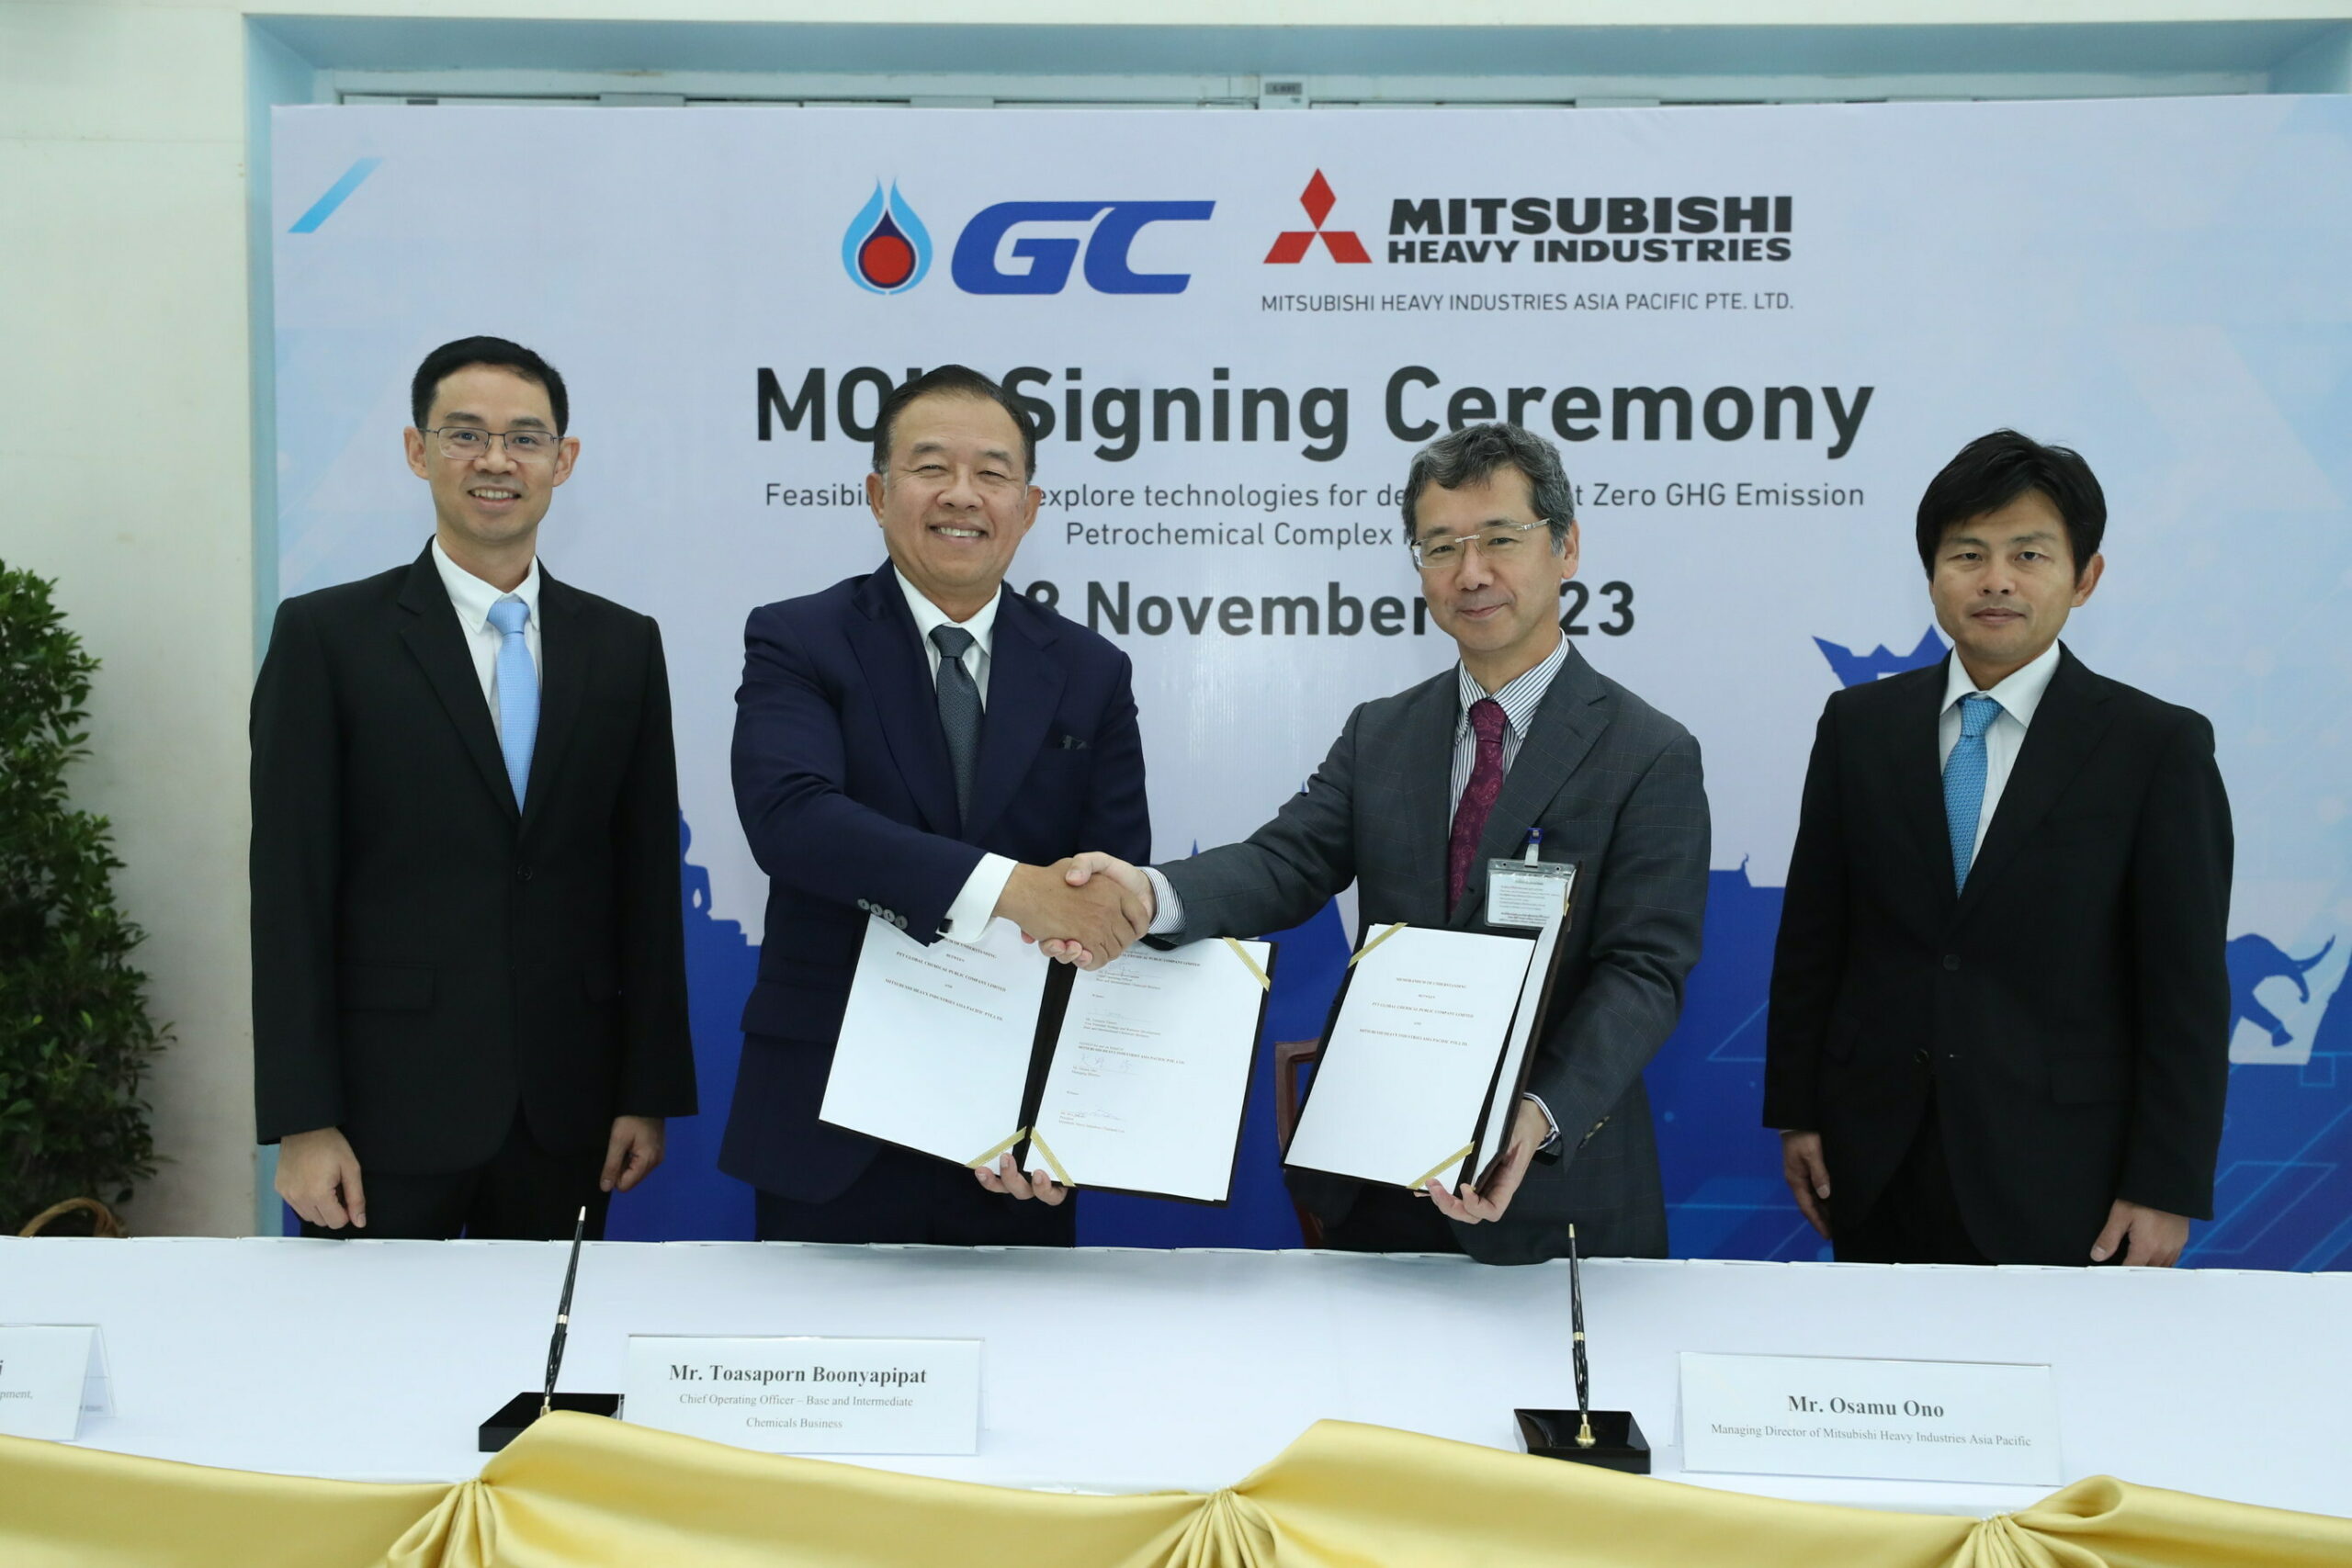 PTT Global Chemical and Mitsubishi Heavy Industries Asia Pacific sign MoU to explore technologies to re-design existing assets into an economically viable carbon neutral petrochemical complex in Thailand